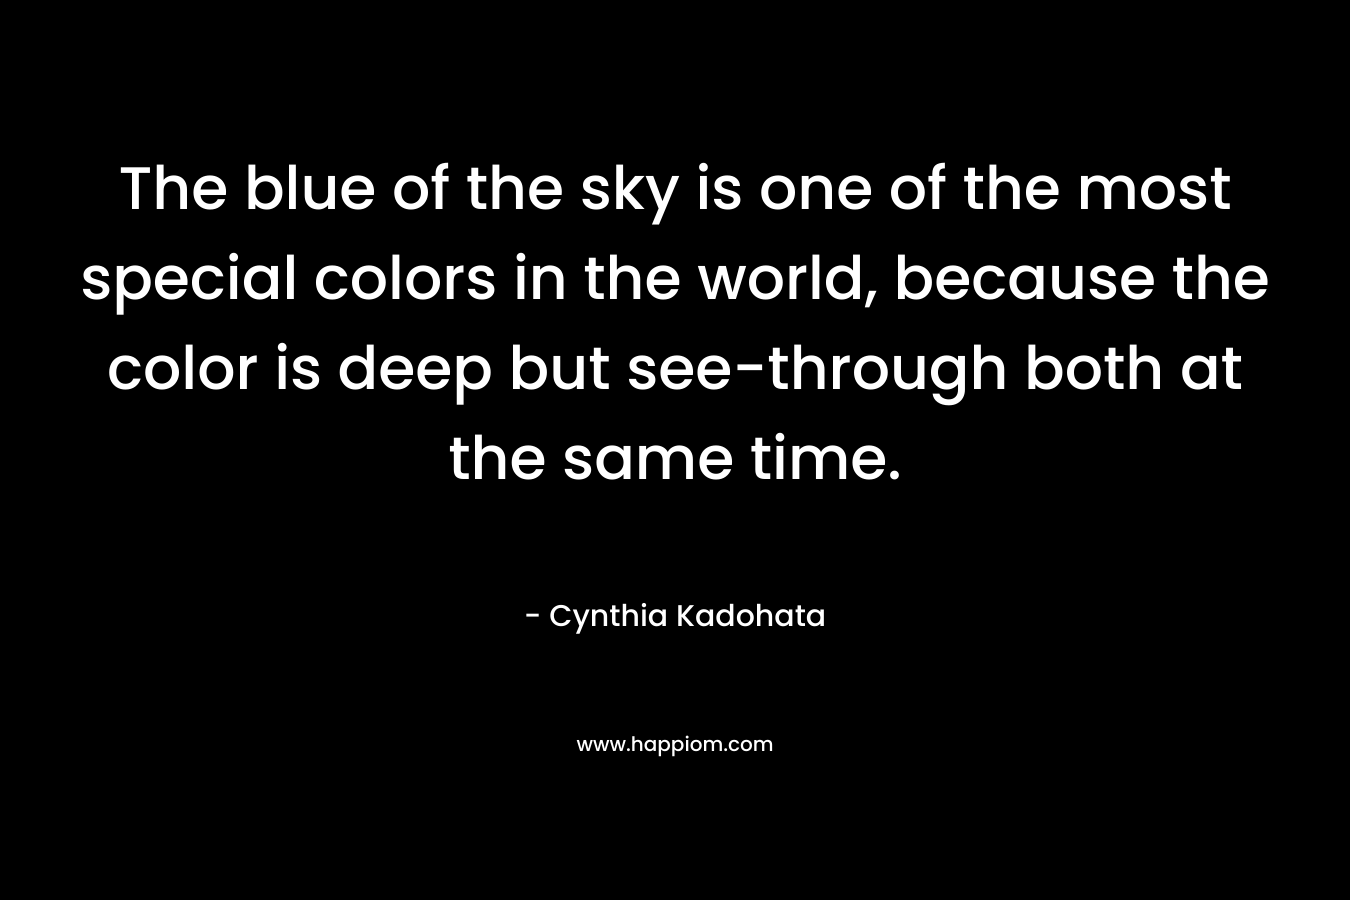 The blue of the sky is one of the most special colors in the world, because the color is deep but see-through both at the same time.